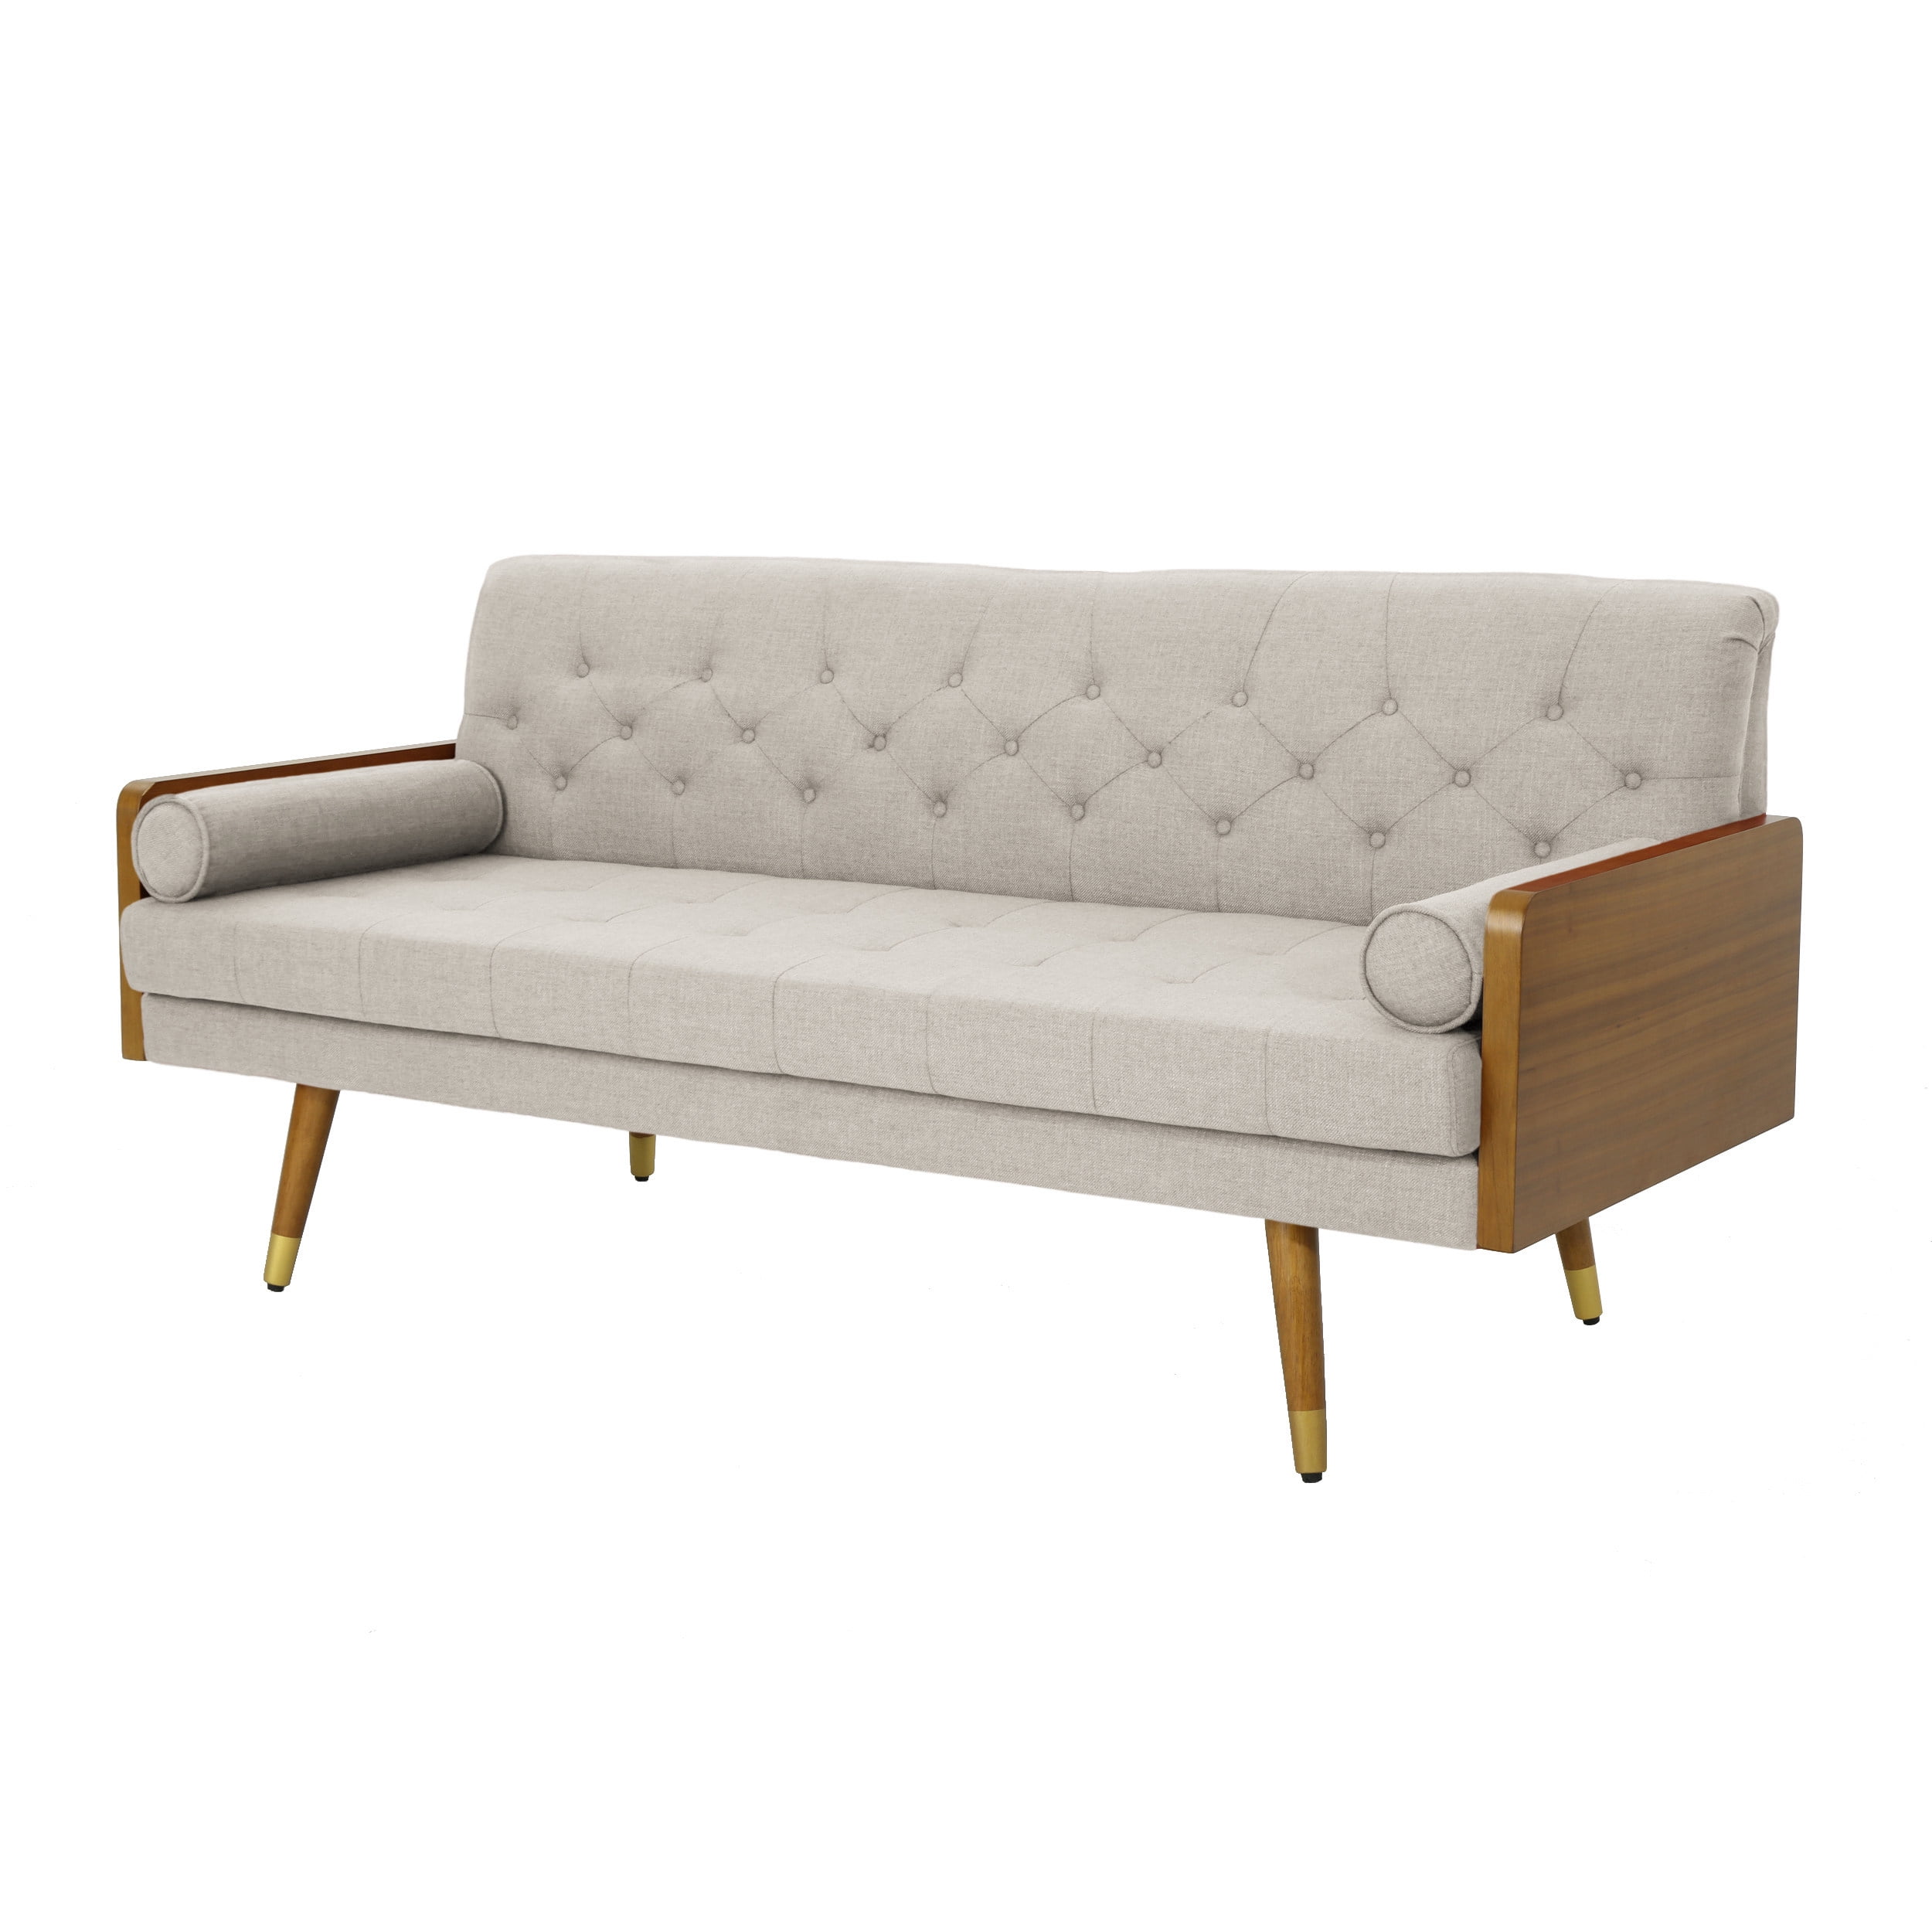 The Alvin Beige Mid Century Modern Sofa at Furniture Express